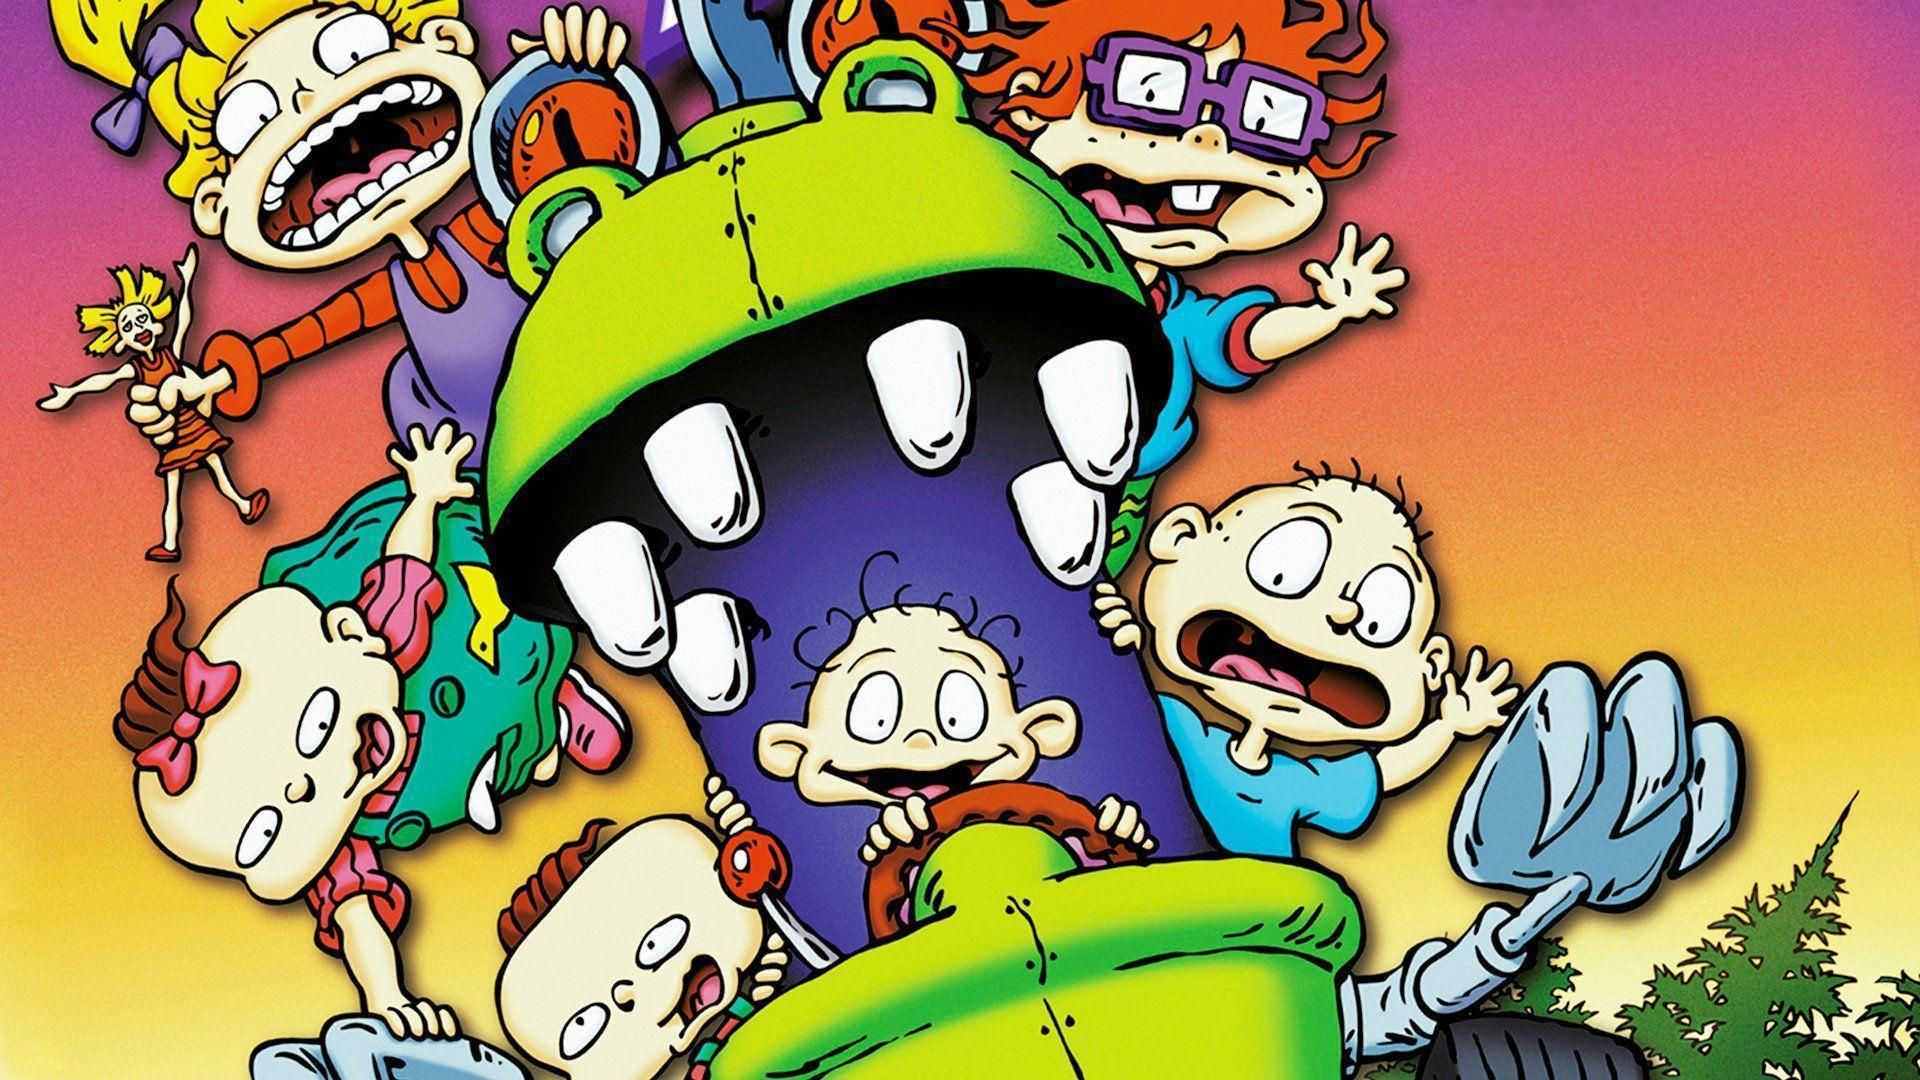 The main cast of Nickelodeon's animated series Rugrats.